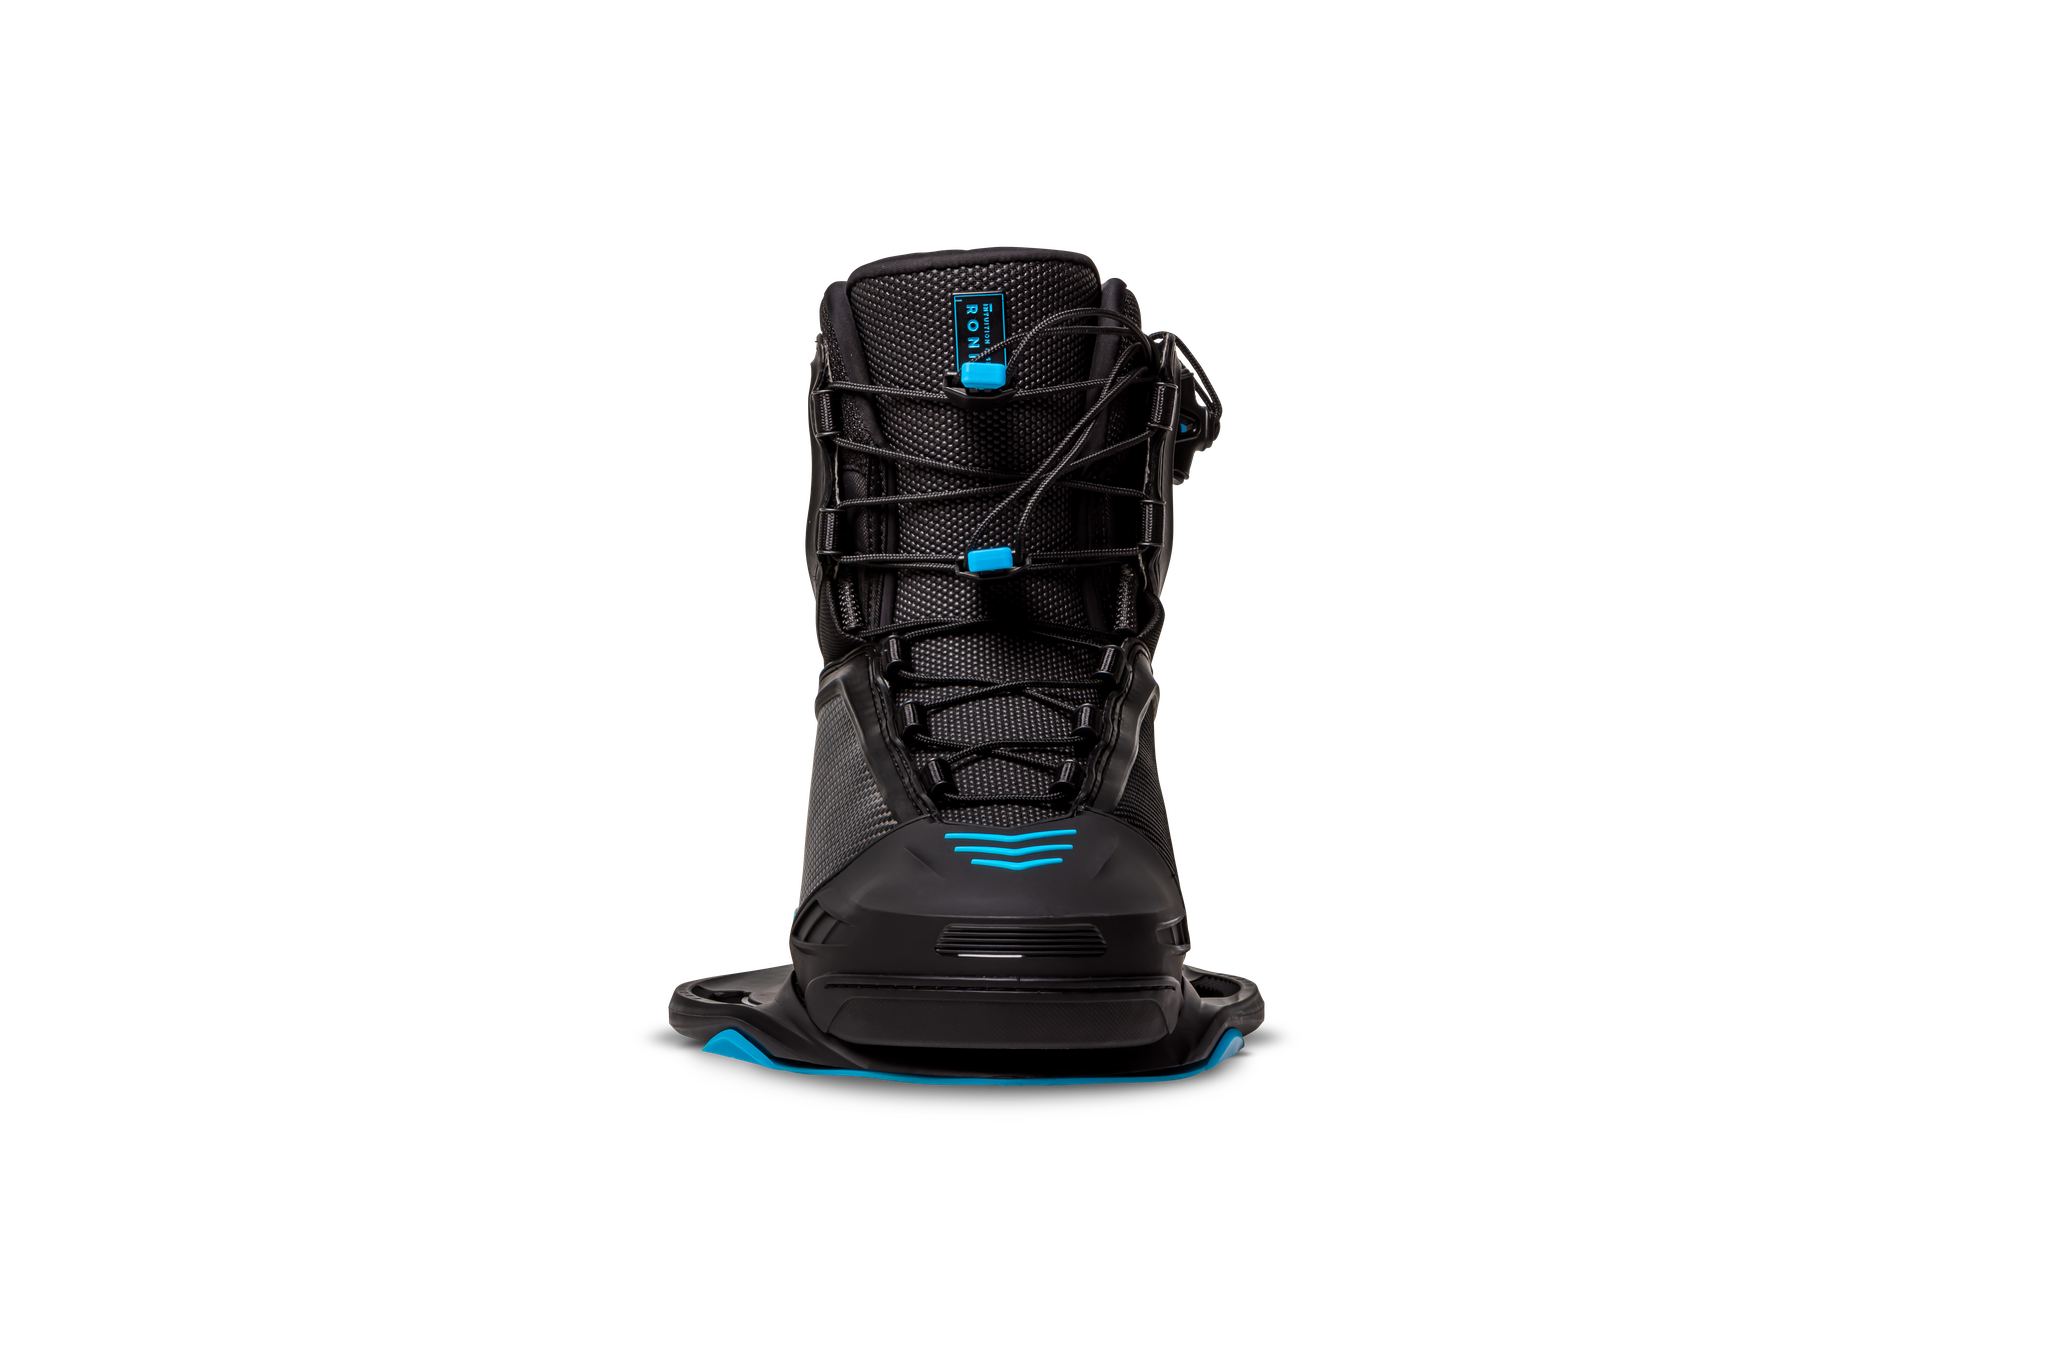 A Ronix 2023 One Carbitex Boot on a black background with an Intuition+ heat moldable liner.